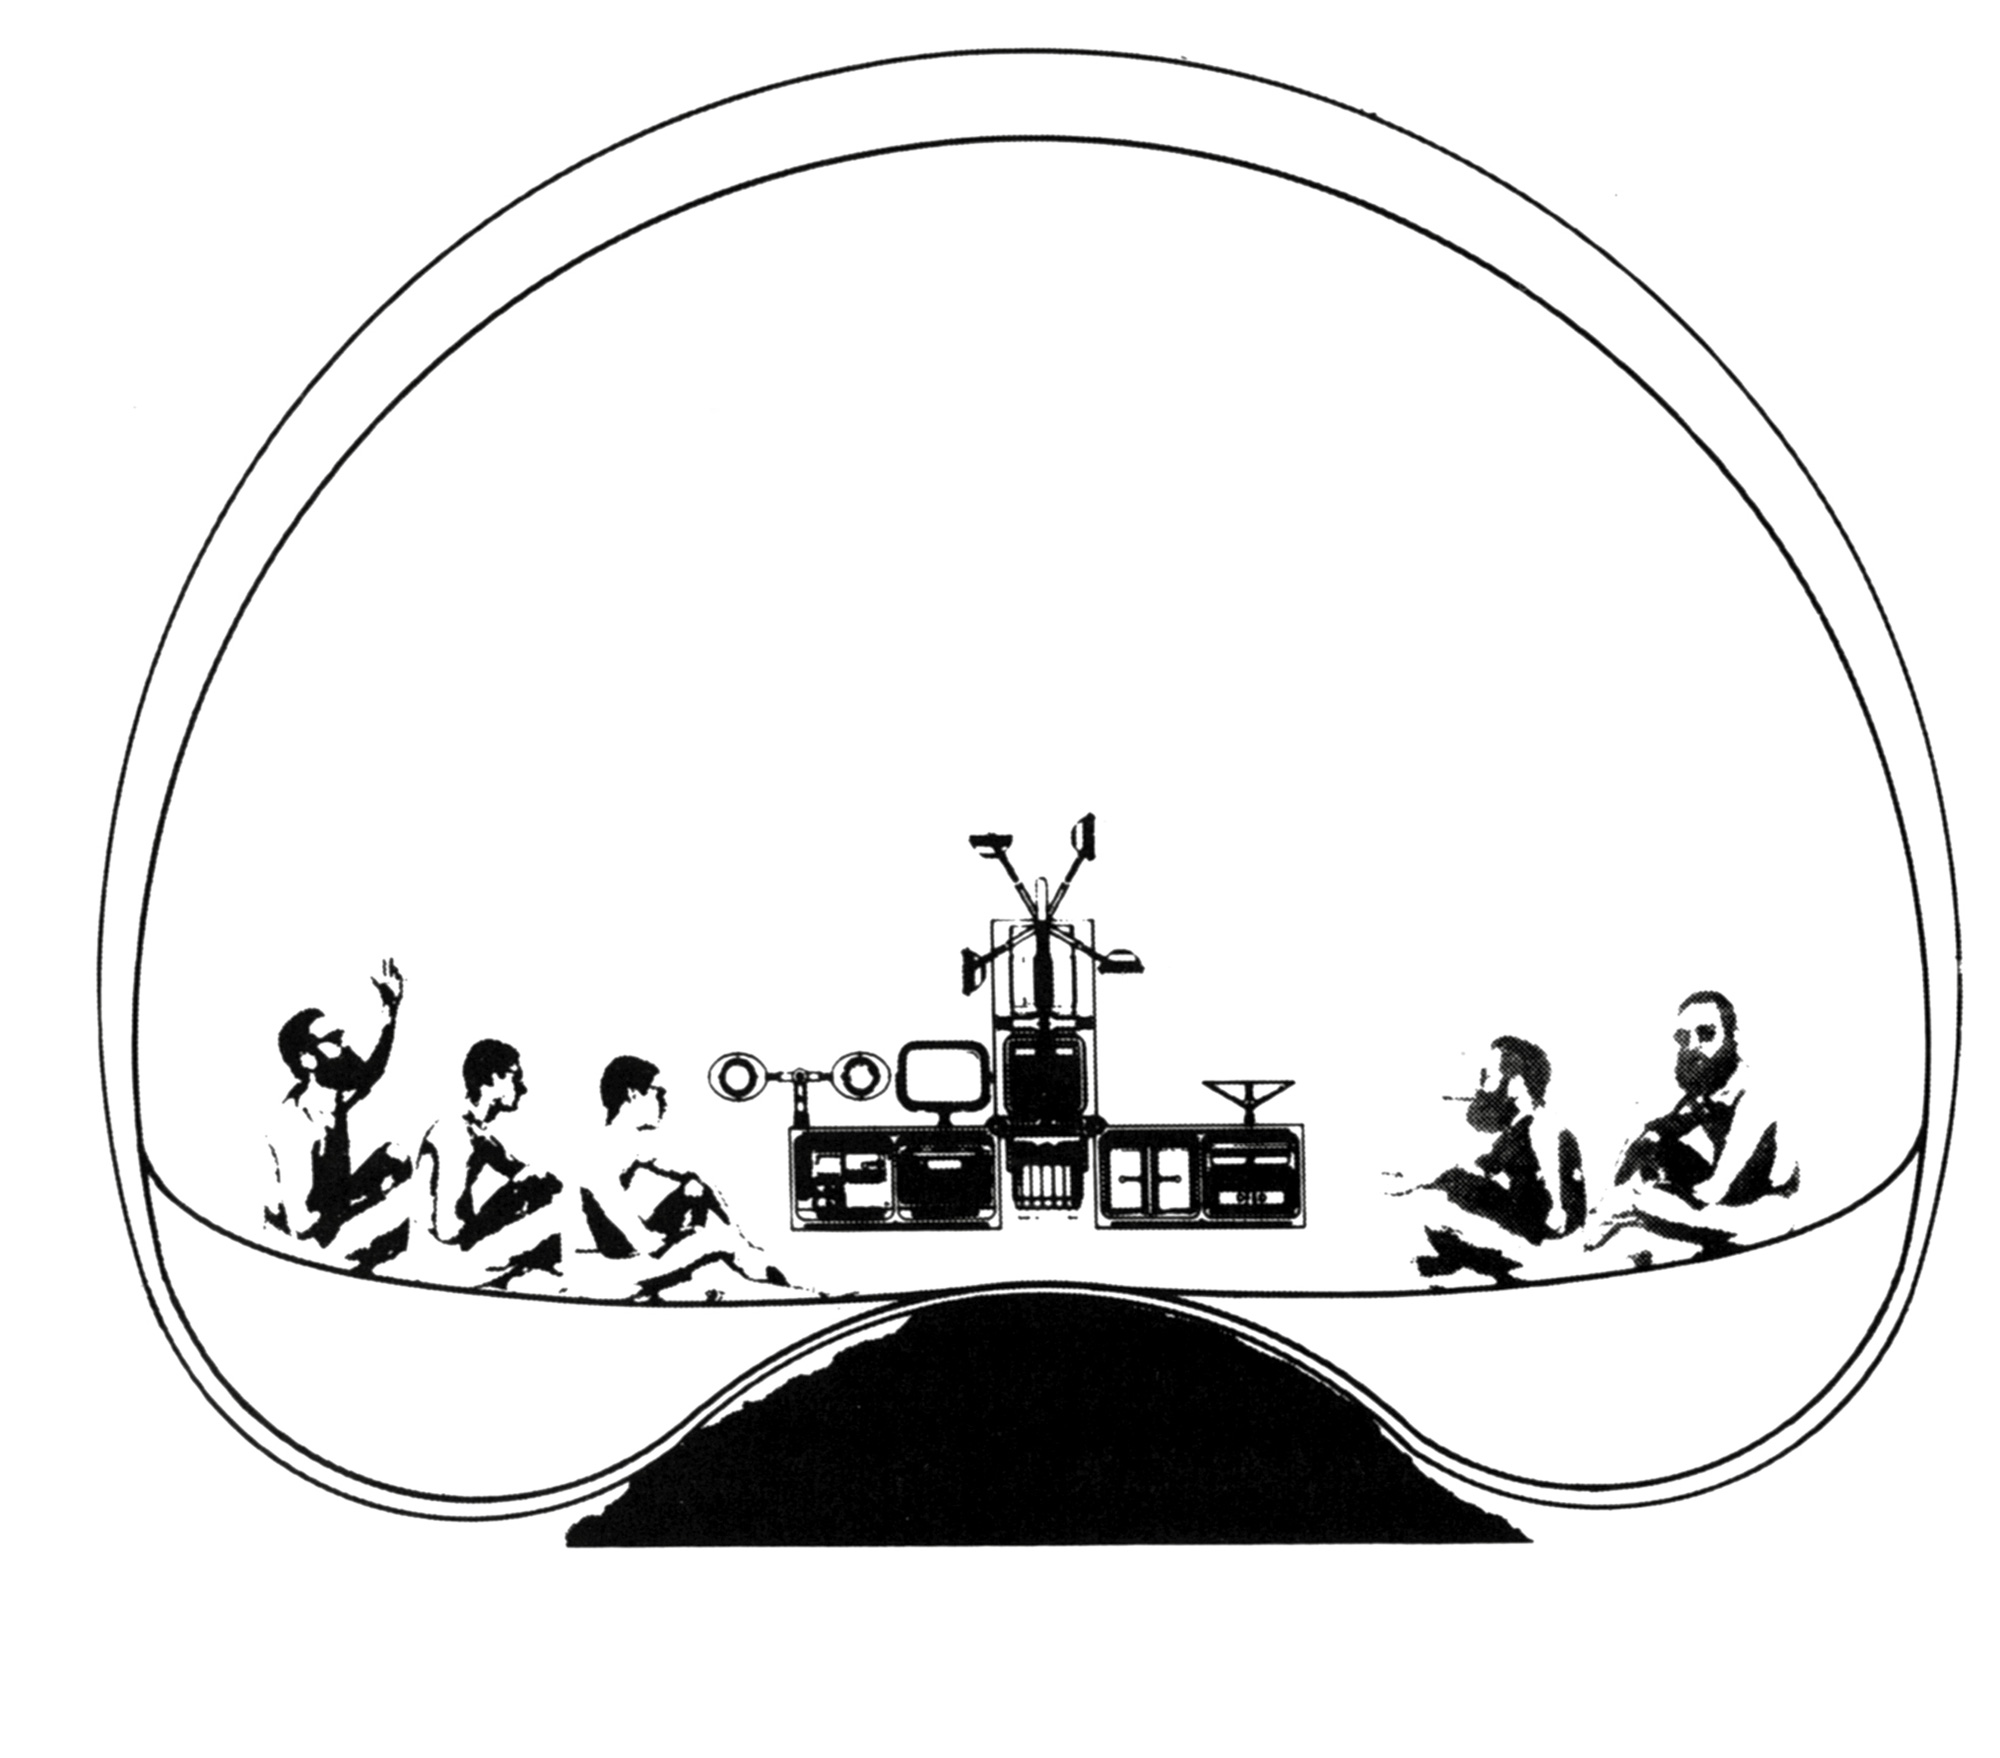 An illustration of figures sitting in a dome titled “Environment Bubble,” by François Dallegret and Reyner Banham.